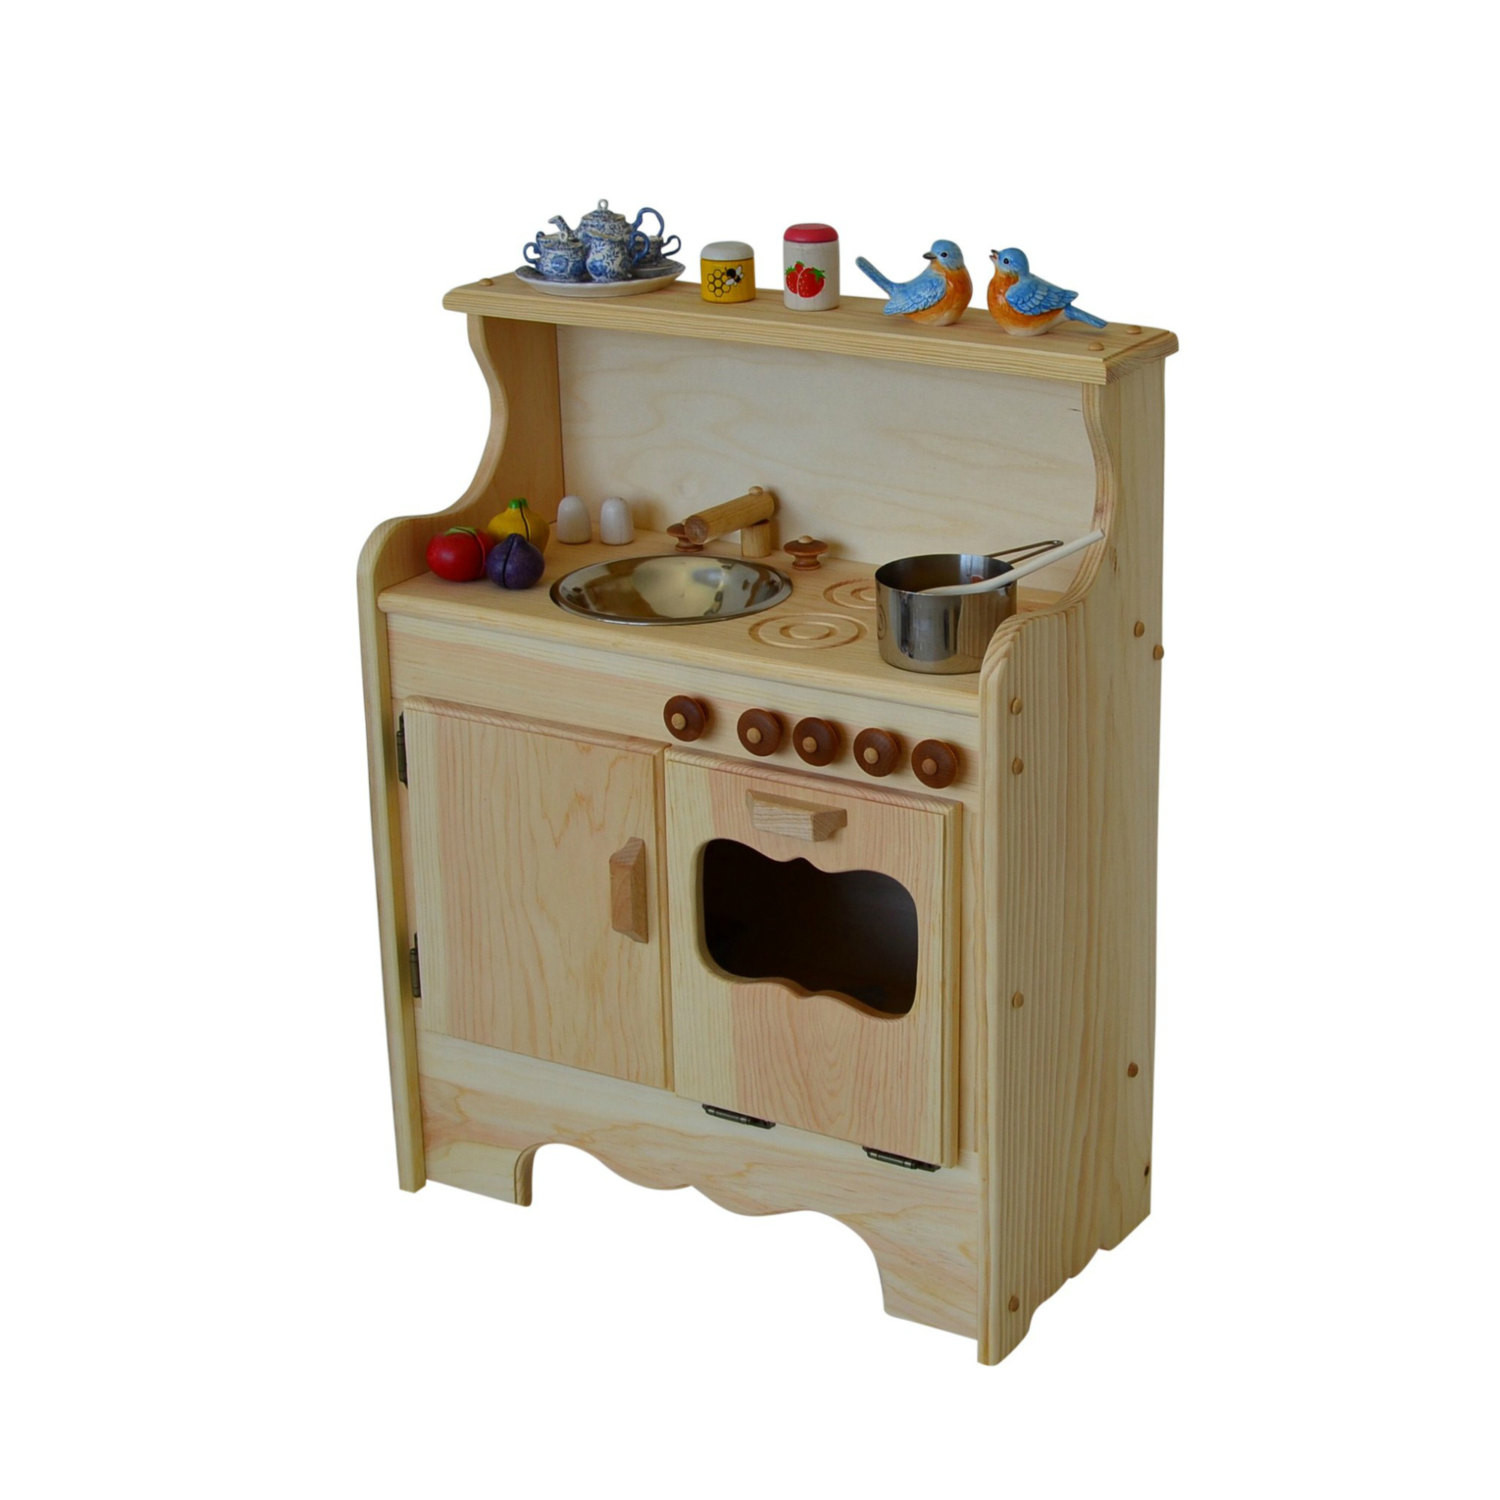 Small Wooden Play Kitchen
 Play Kitchen Natural Wooden Play Kitchen Waldorf Toy